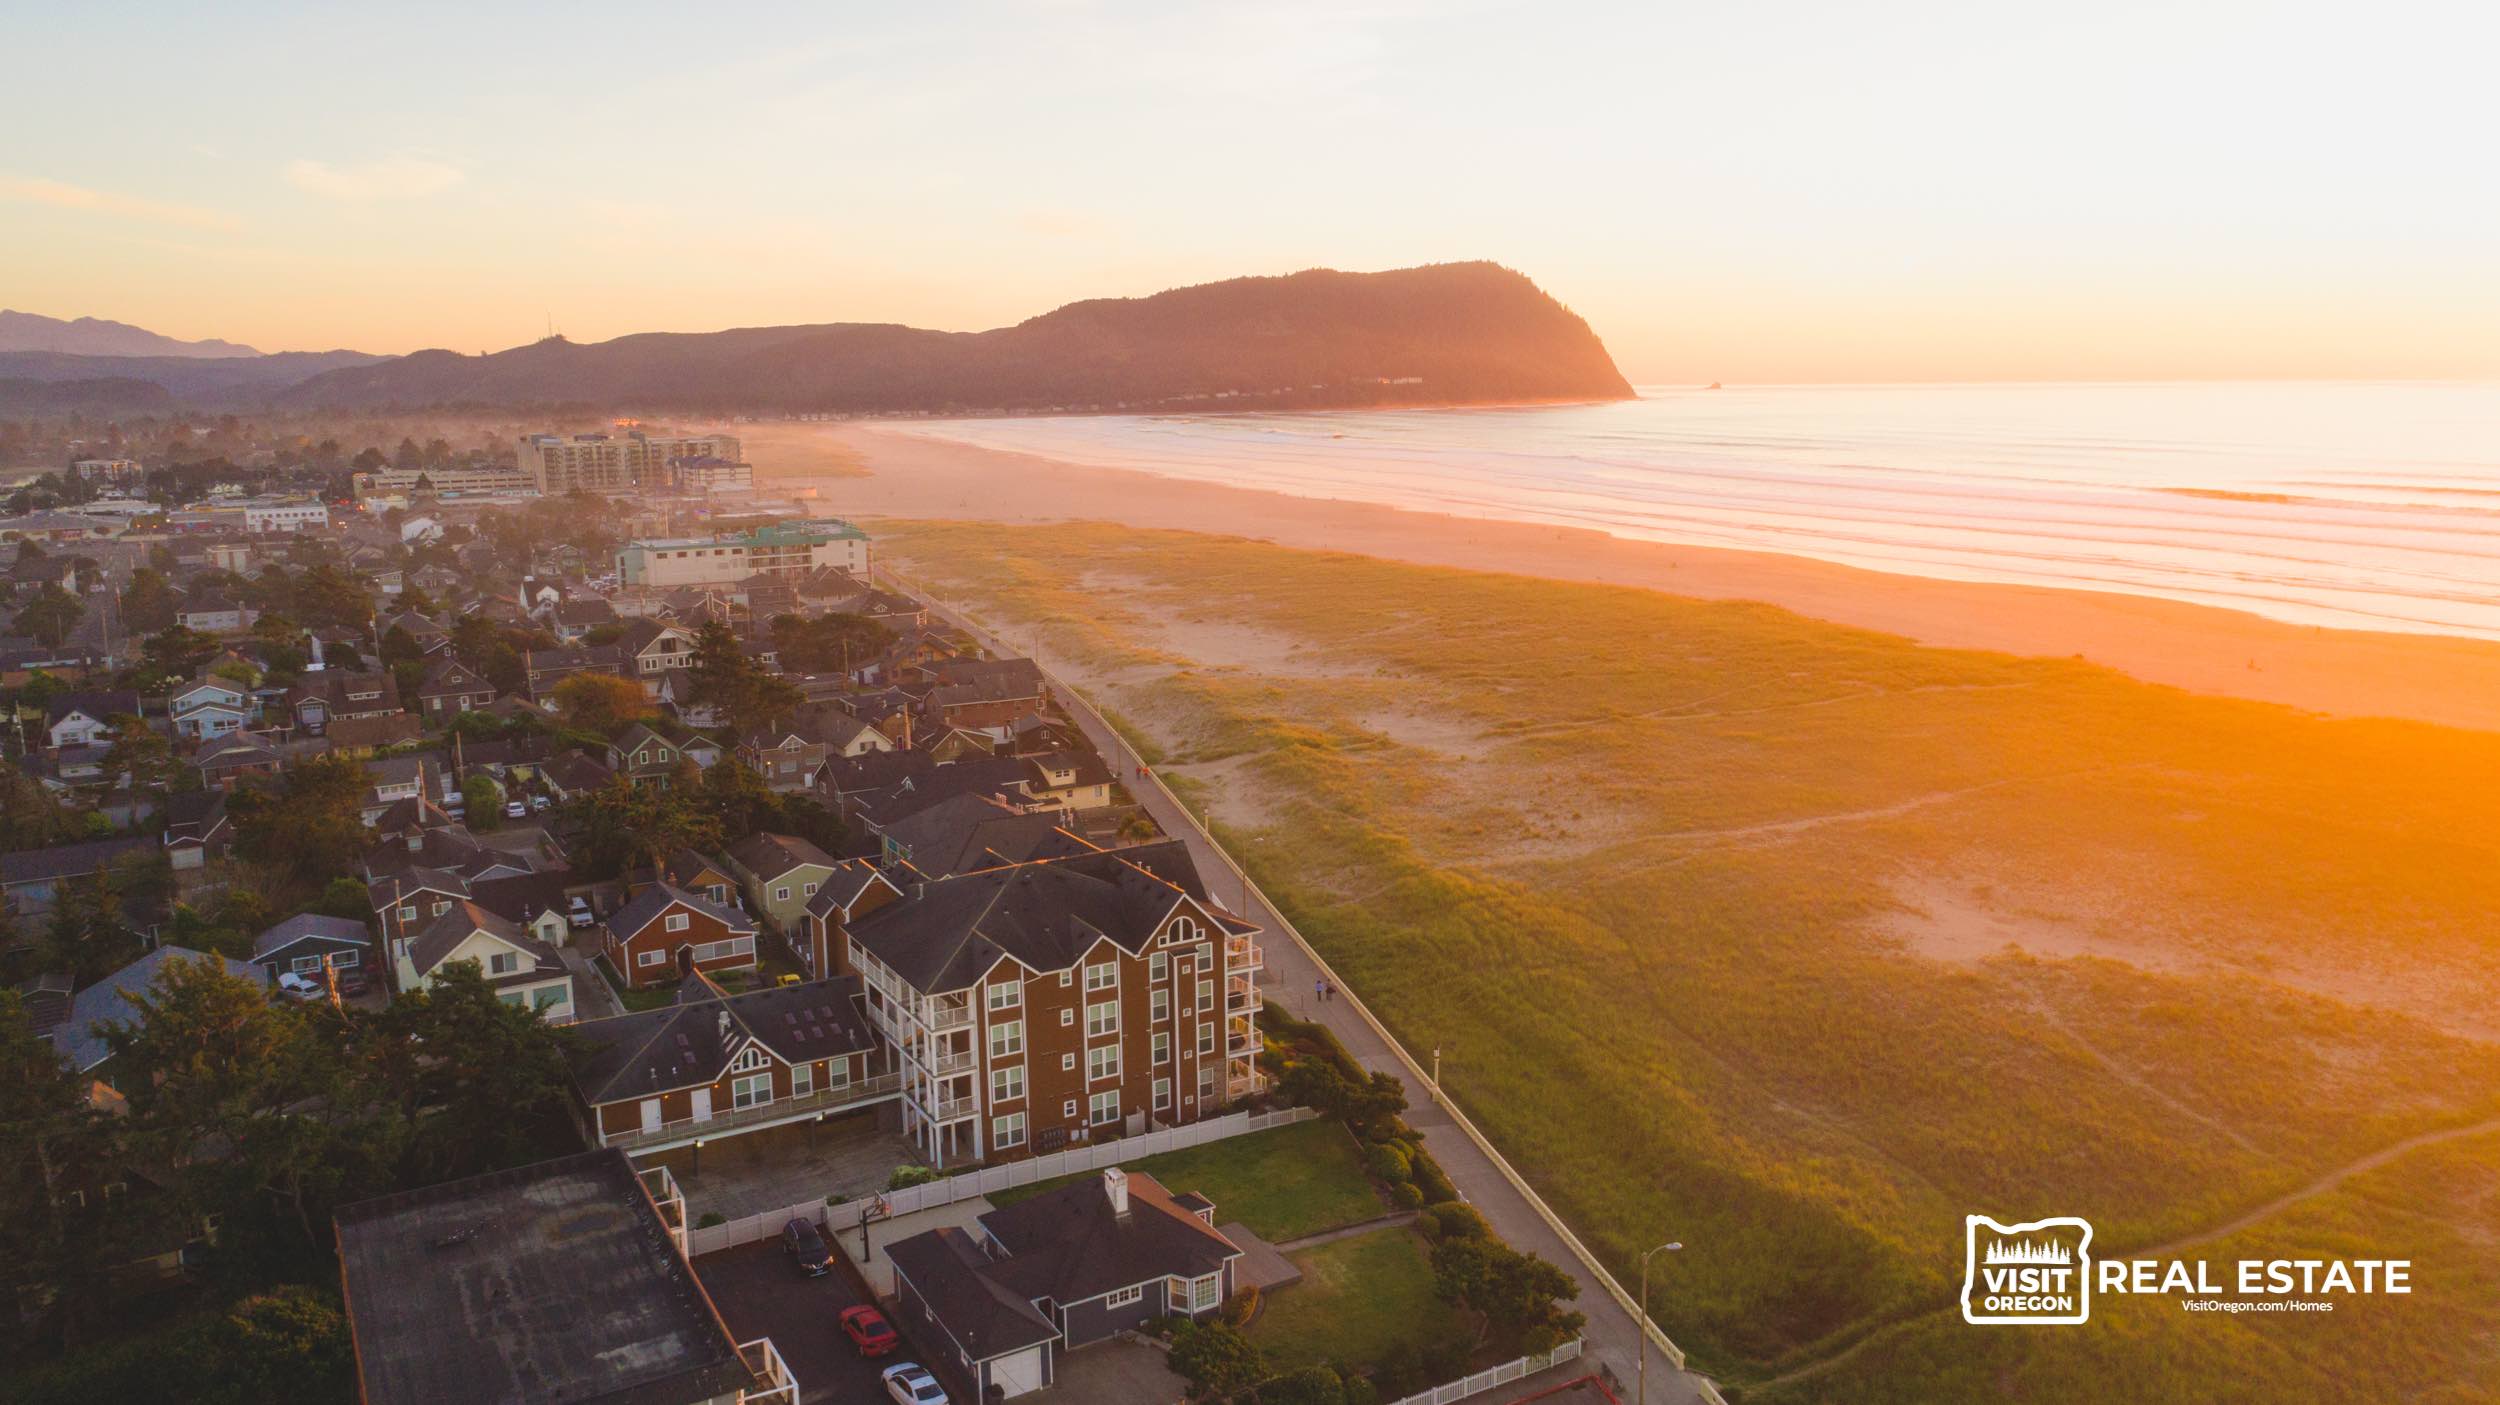 Drone shot of Oceanfront homes on the prom in Seaside Oregon.